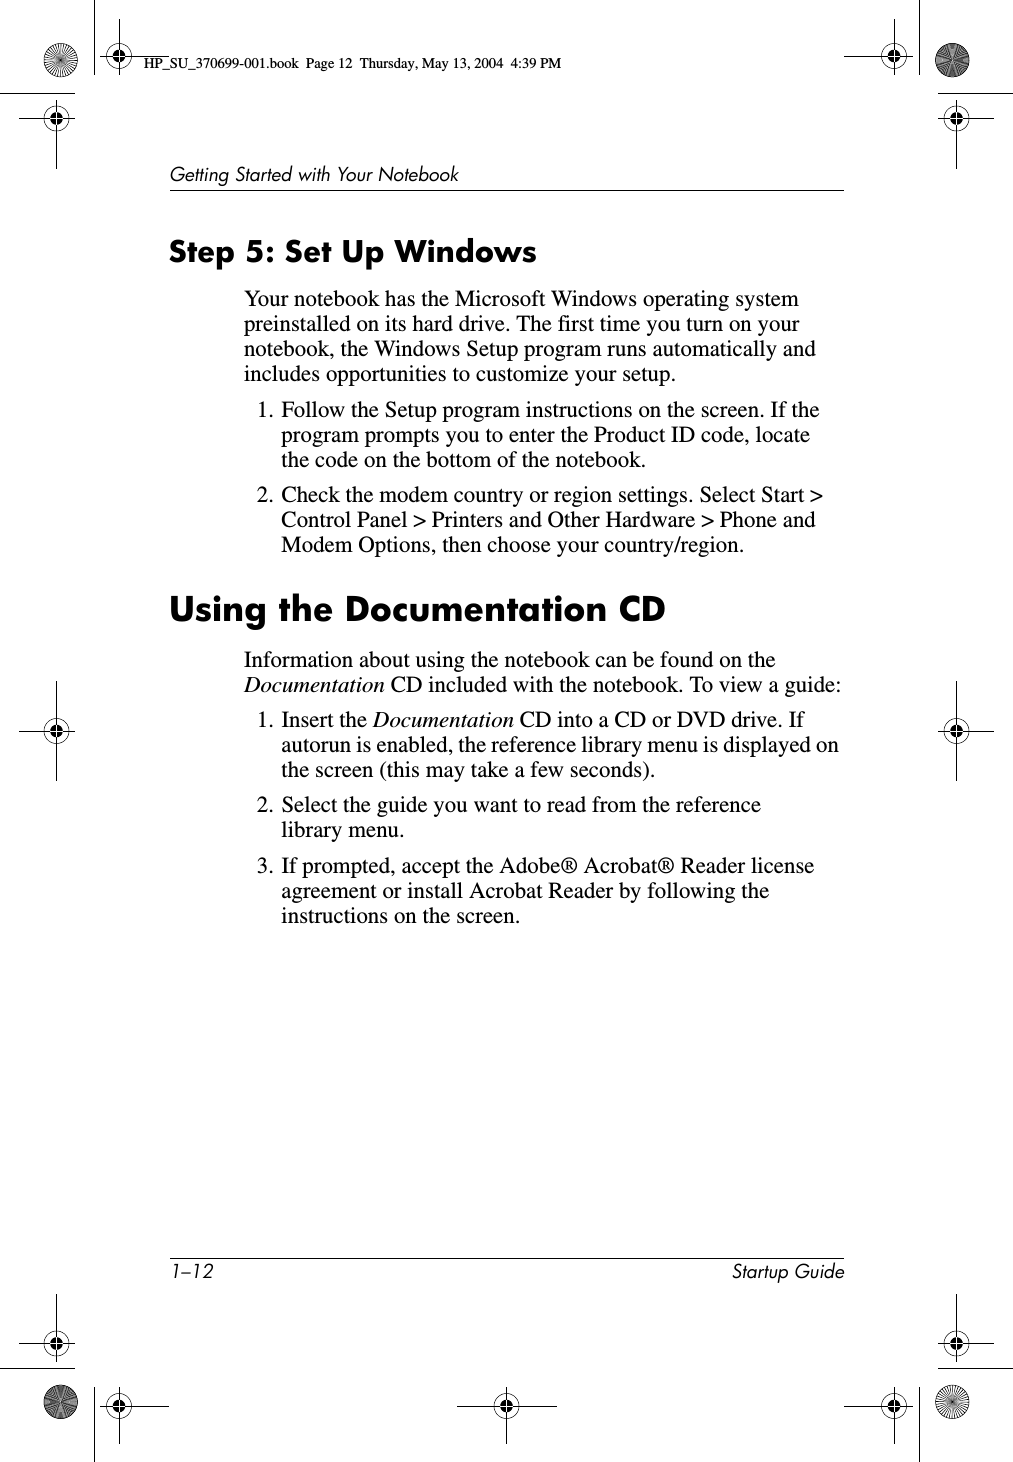 1–12 Startup GuideGetting Started with Your NotebookStep 5: Set Up WindowsYour notebook has the Microsoft Windows operating system preinstalled on its hard drive. The first time you turn on your notebook, the Windows Setup program runs automatically and includes opportunities to customize your setup.1. Follow the Setup program instructions on the screen. If the program prompts you to enter the Product ID code, locate the code on the bottom of the notebook.2. Check the modem country or region settings. Select Start &gt; Control Panel &gt; Printers and Other Hardware &gt; Phone and Modem Options, then choose your country/region.Using the Documentation CDInformation about using the notebook can be found on the Documentation CD included with the notebook. To view a guide:1. Insert the Documentation CD into a CD or DVD drive. If autorun is enabled, the reference library menu is displayed on the screen (this may take a few seconds).2. Select the guide you want to read from the reference library menu.3. If prompted, accept the Adobe® Acrobat® Reader license agreement or install Acrobat Reader by following the instructions on the screen.HP_SU_370699-001.book  Page 12  Thursday, May 13, 2004  4:39 PM